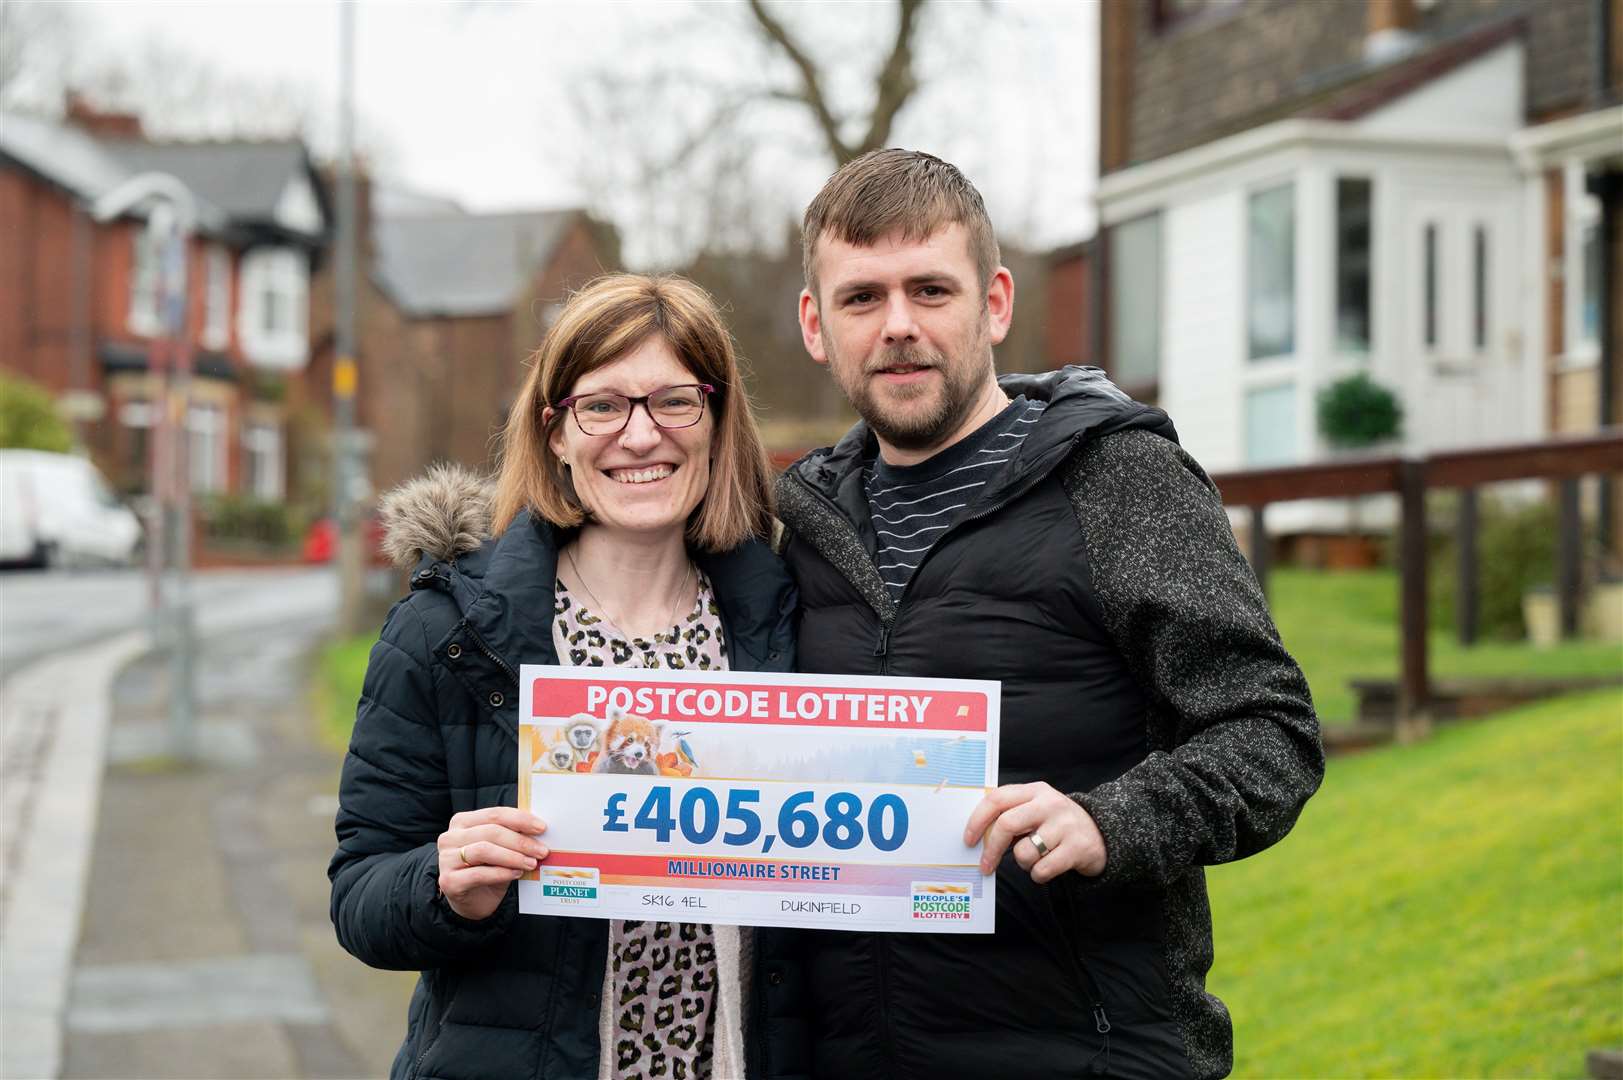 Ms Lee won the prize money six years after the death of her twin boys and now wants to give back in their memory (People’s Postcode Lottery/PA)